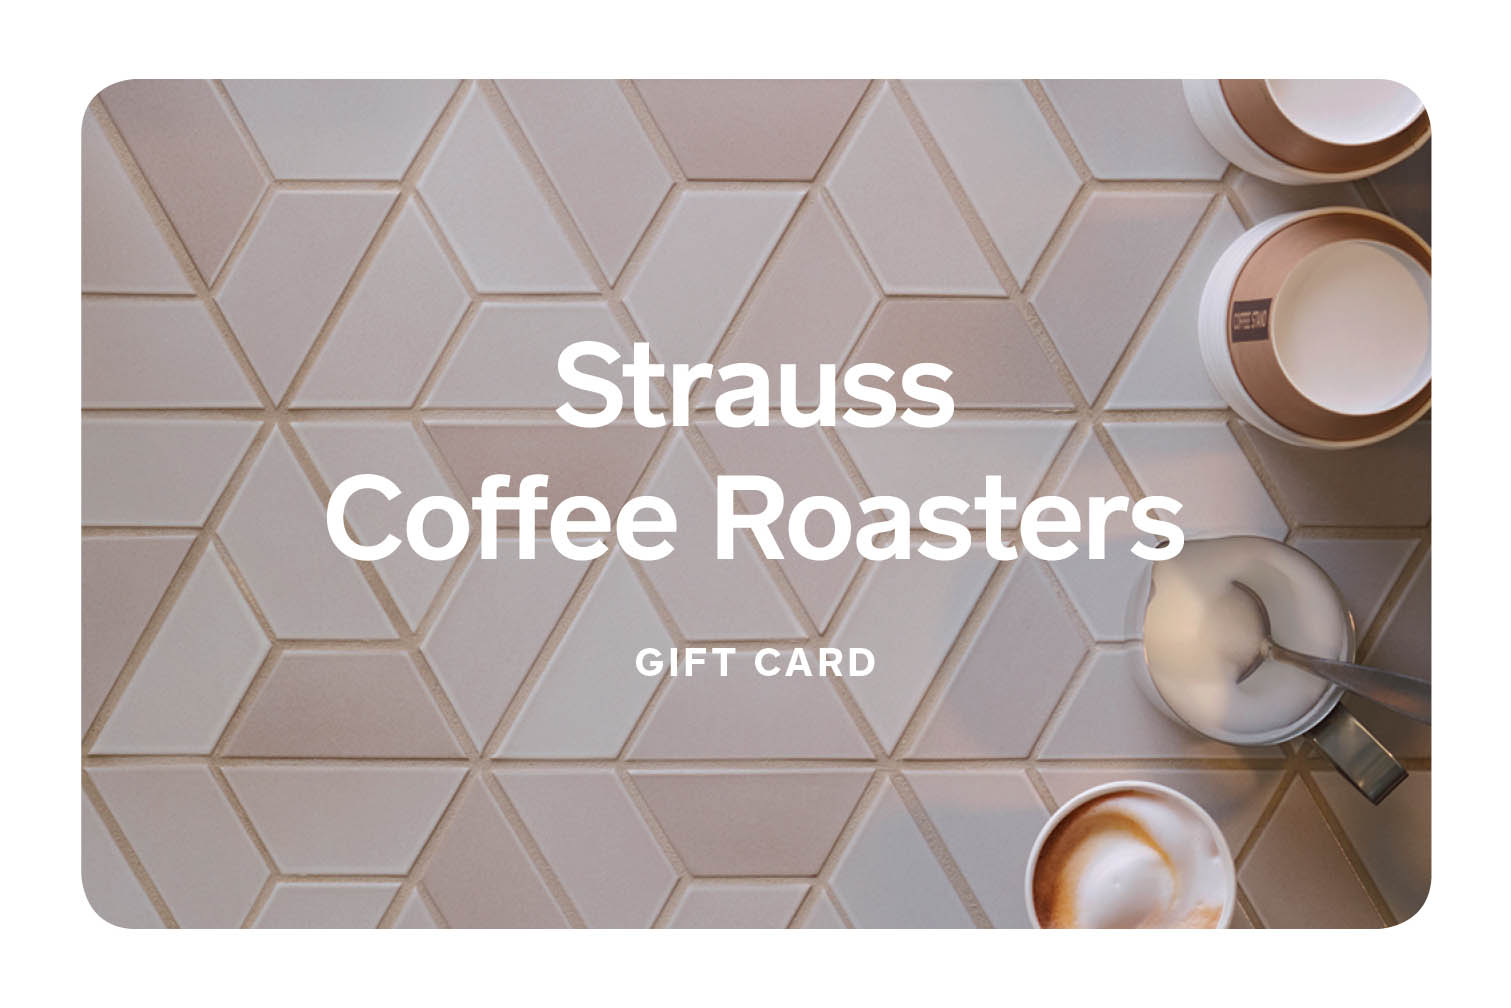 Square Introduces Customizable Physical Gift Cards